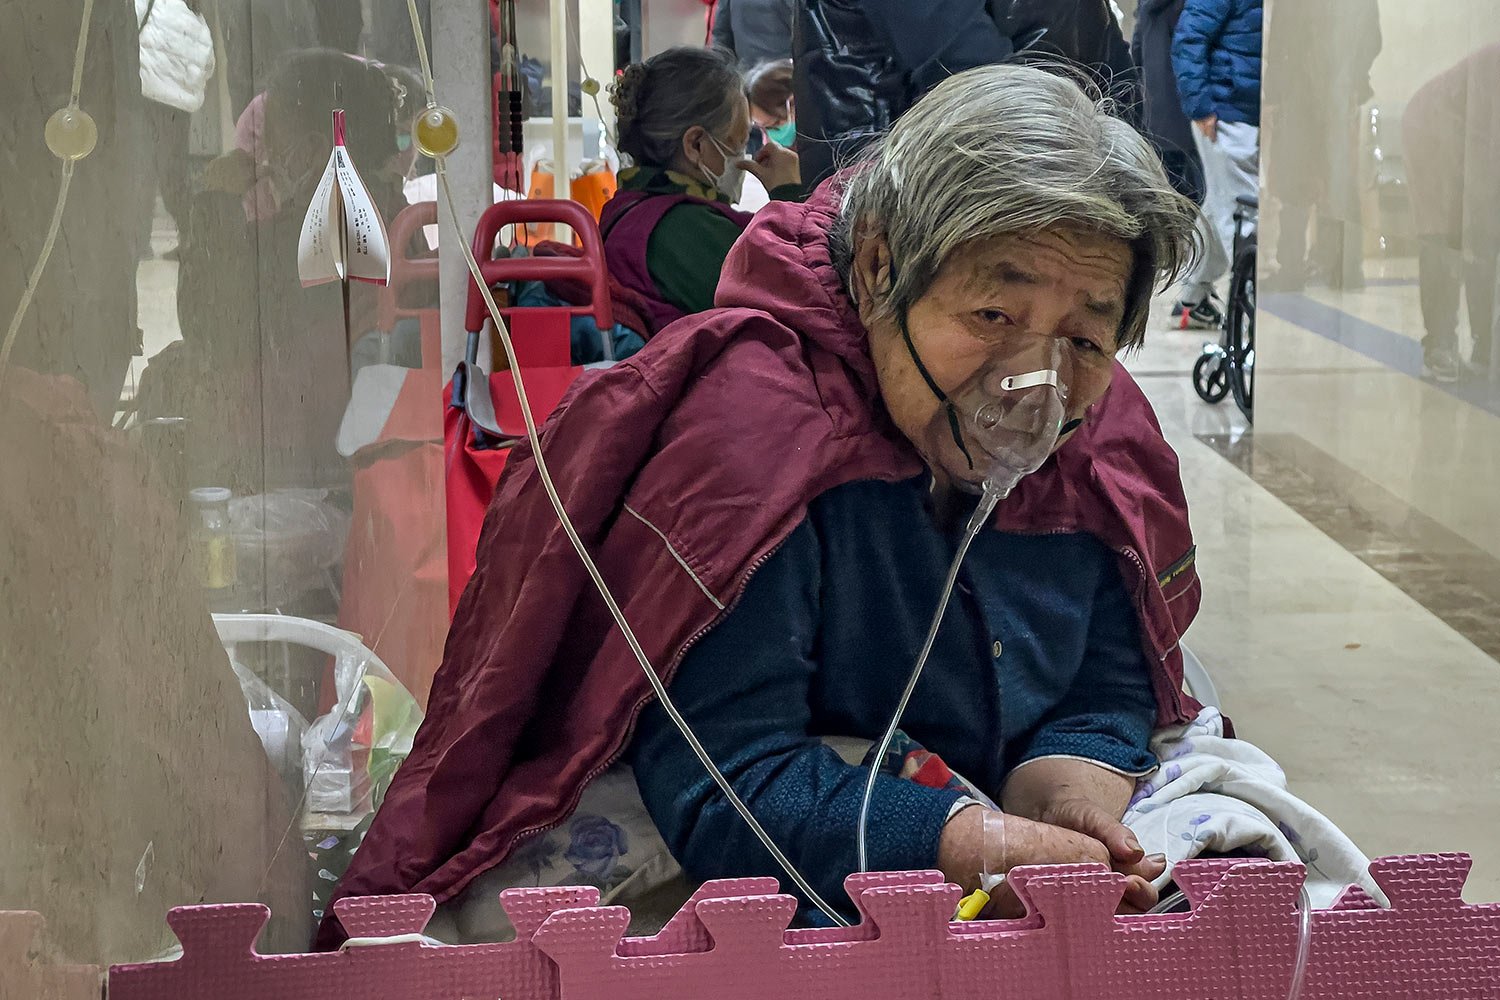  An elderly patient receives an intravenous drip while using a ventilator in the hallway of the emergency ward in Beijing, Thursday, Jan. 5, 2023. (AP Photo/Andy Wong) 